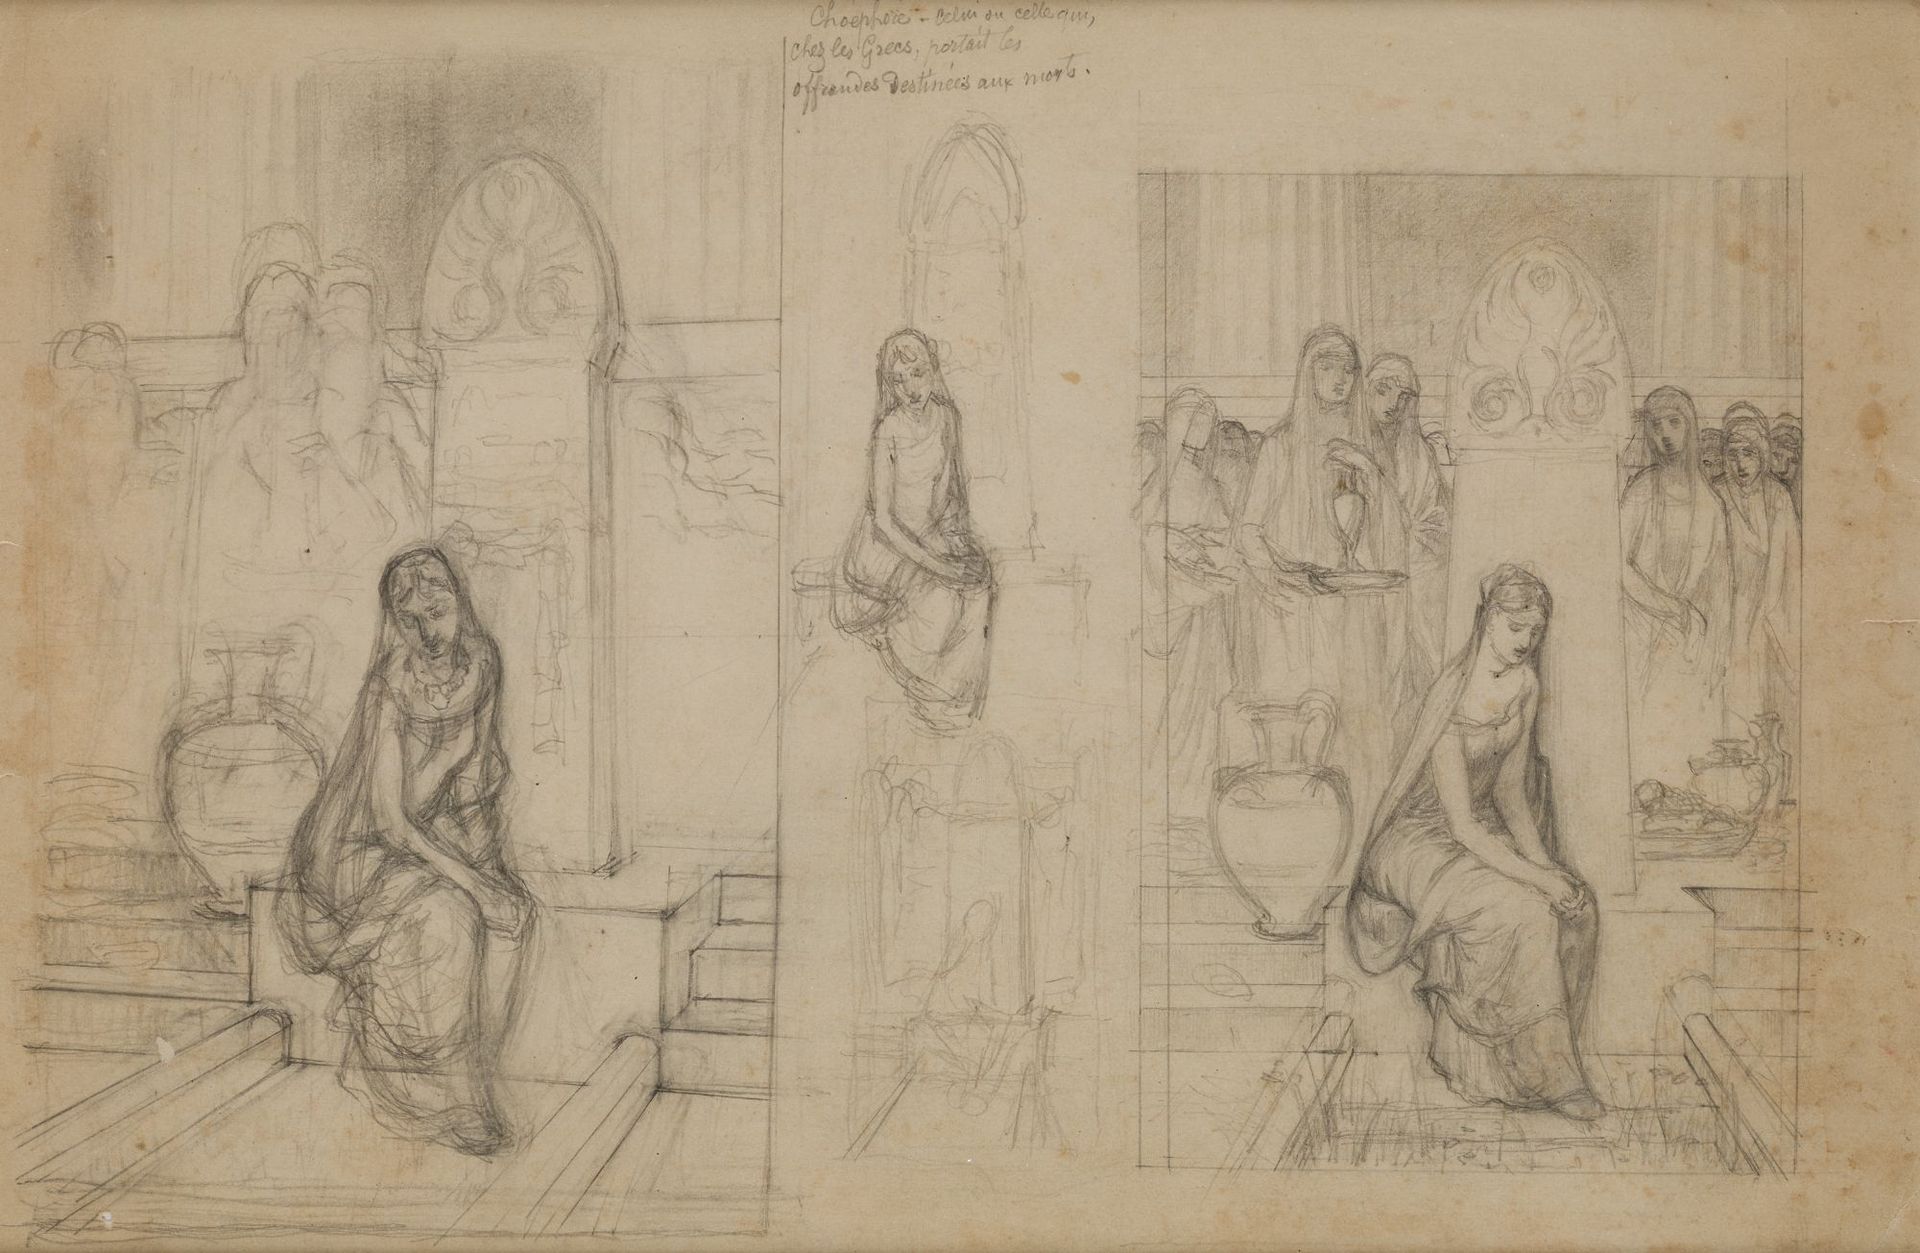 FRENCH SCHOOL (Late 19th century - Early 20th century) "Sketch for The Coephoras&hellip;